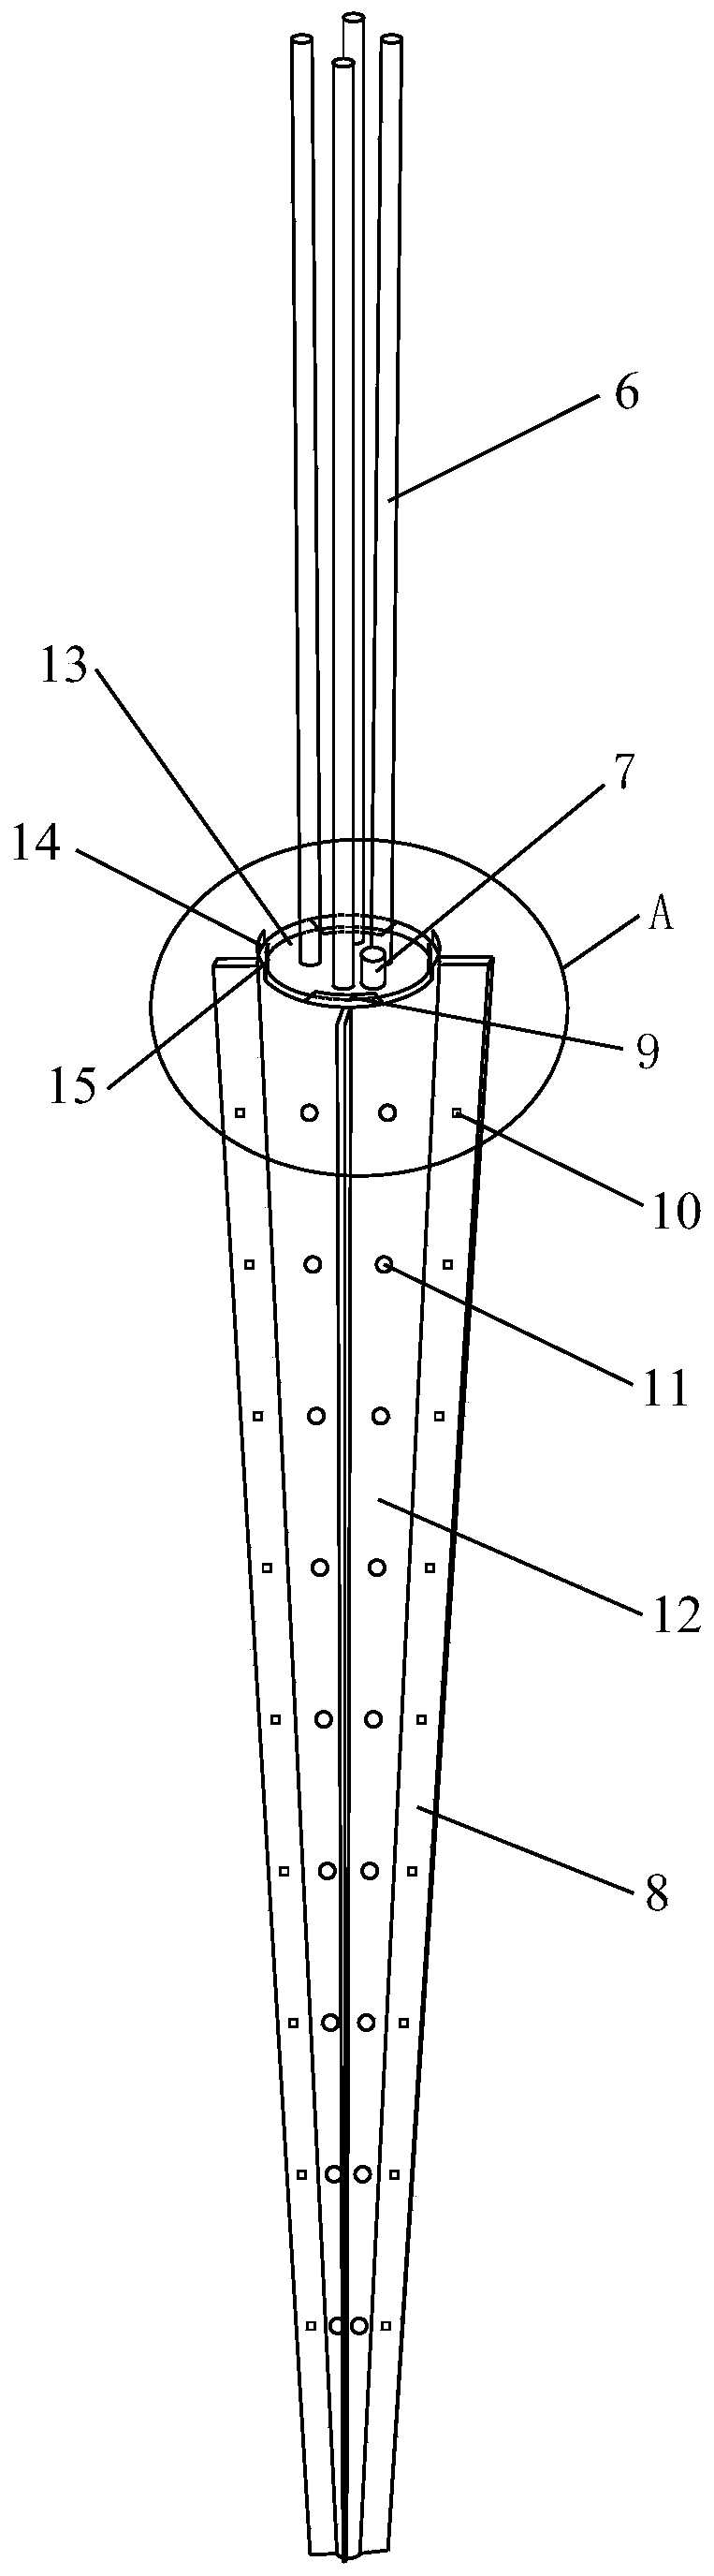 A coal pile temperature measurement and cooling grouting device and system